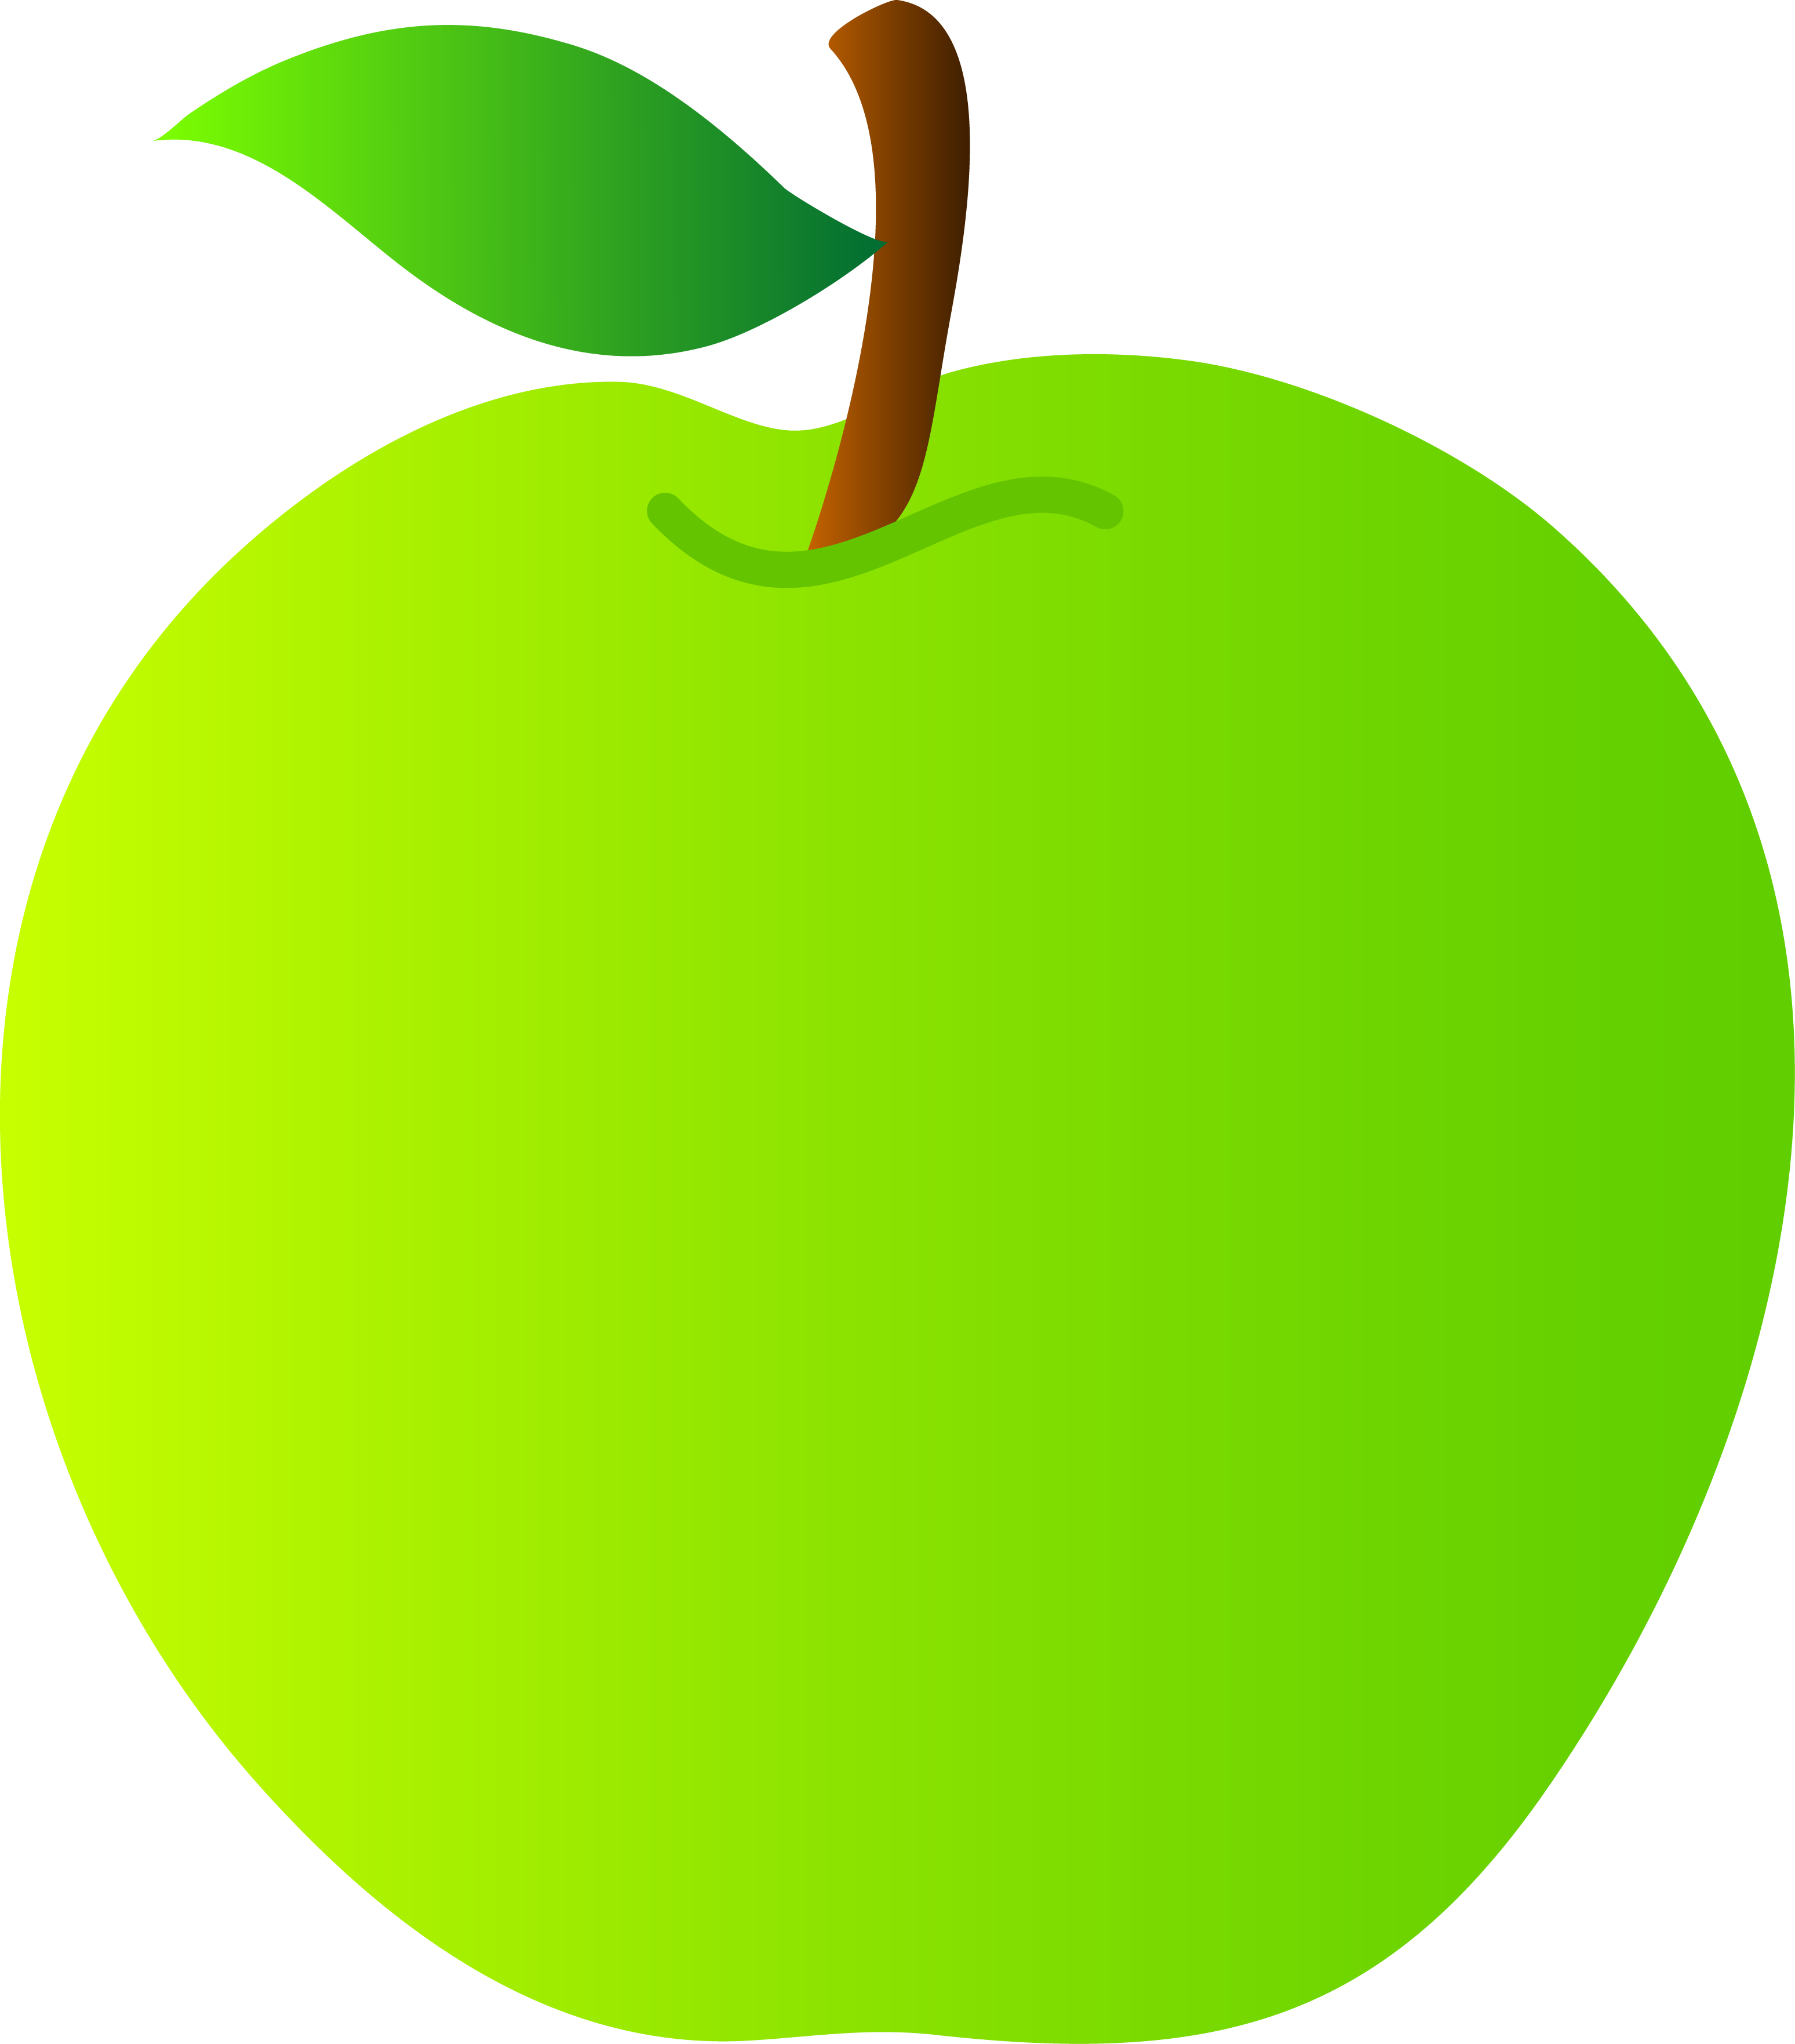 free clipart images for apple - photo #39